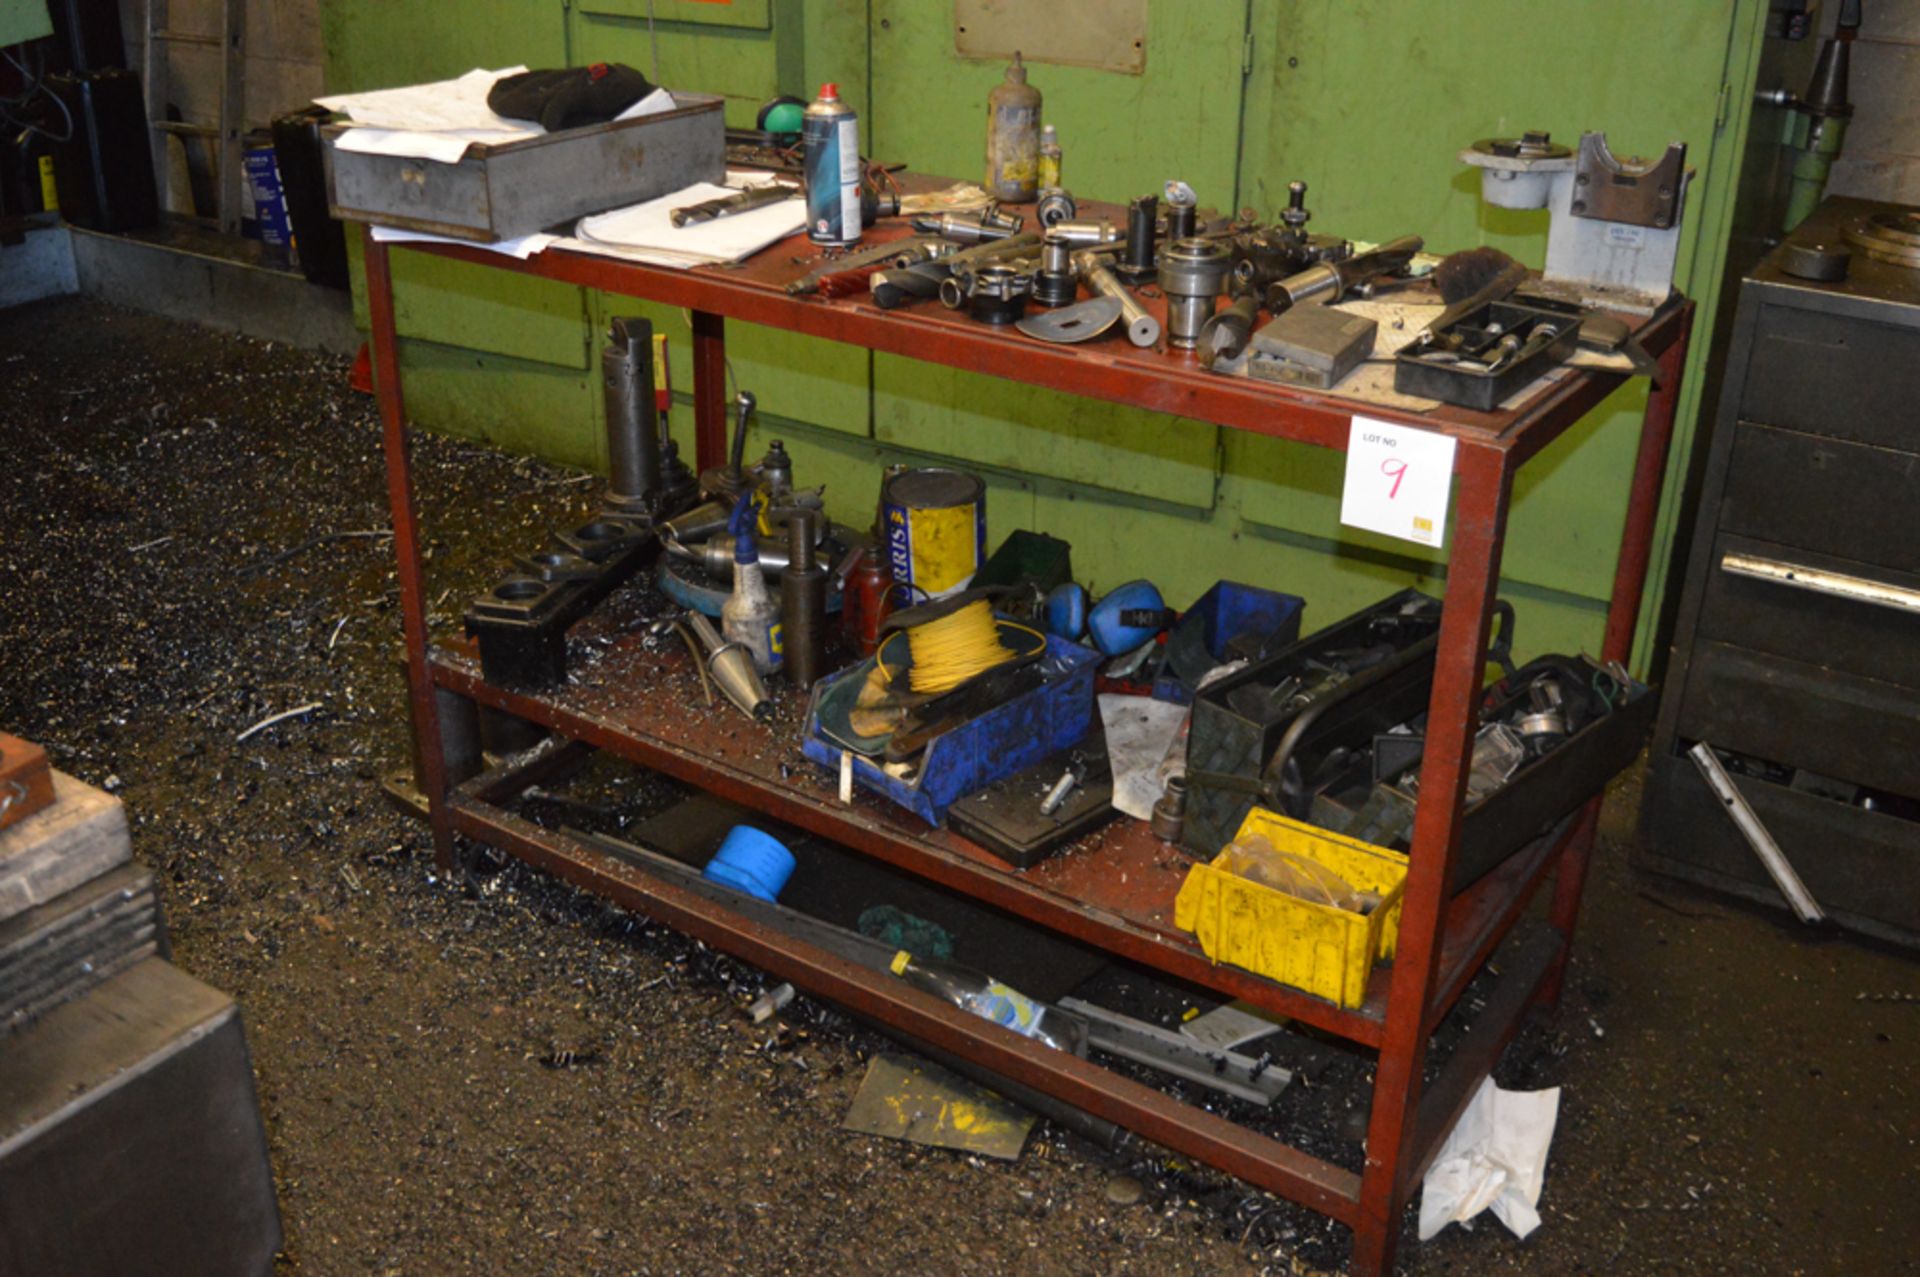 Steel bench & contents of tooling